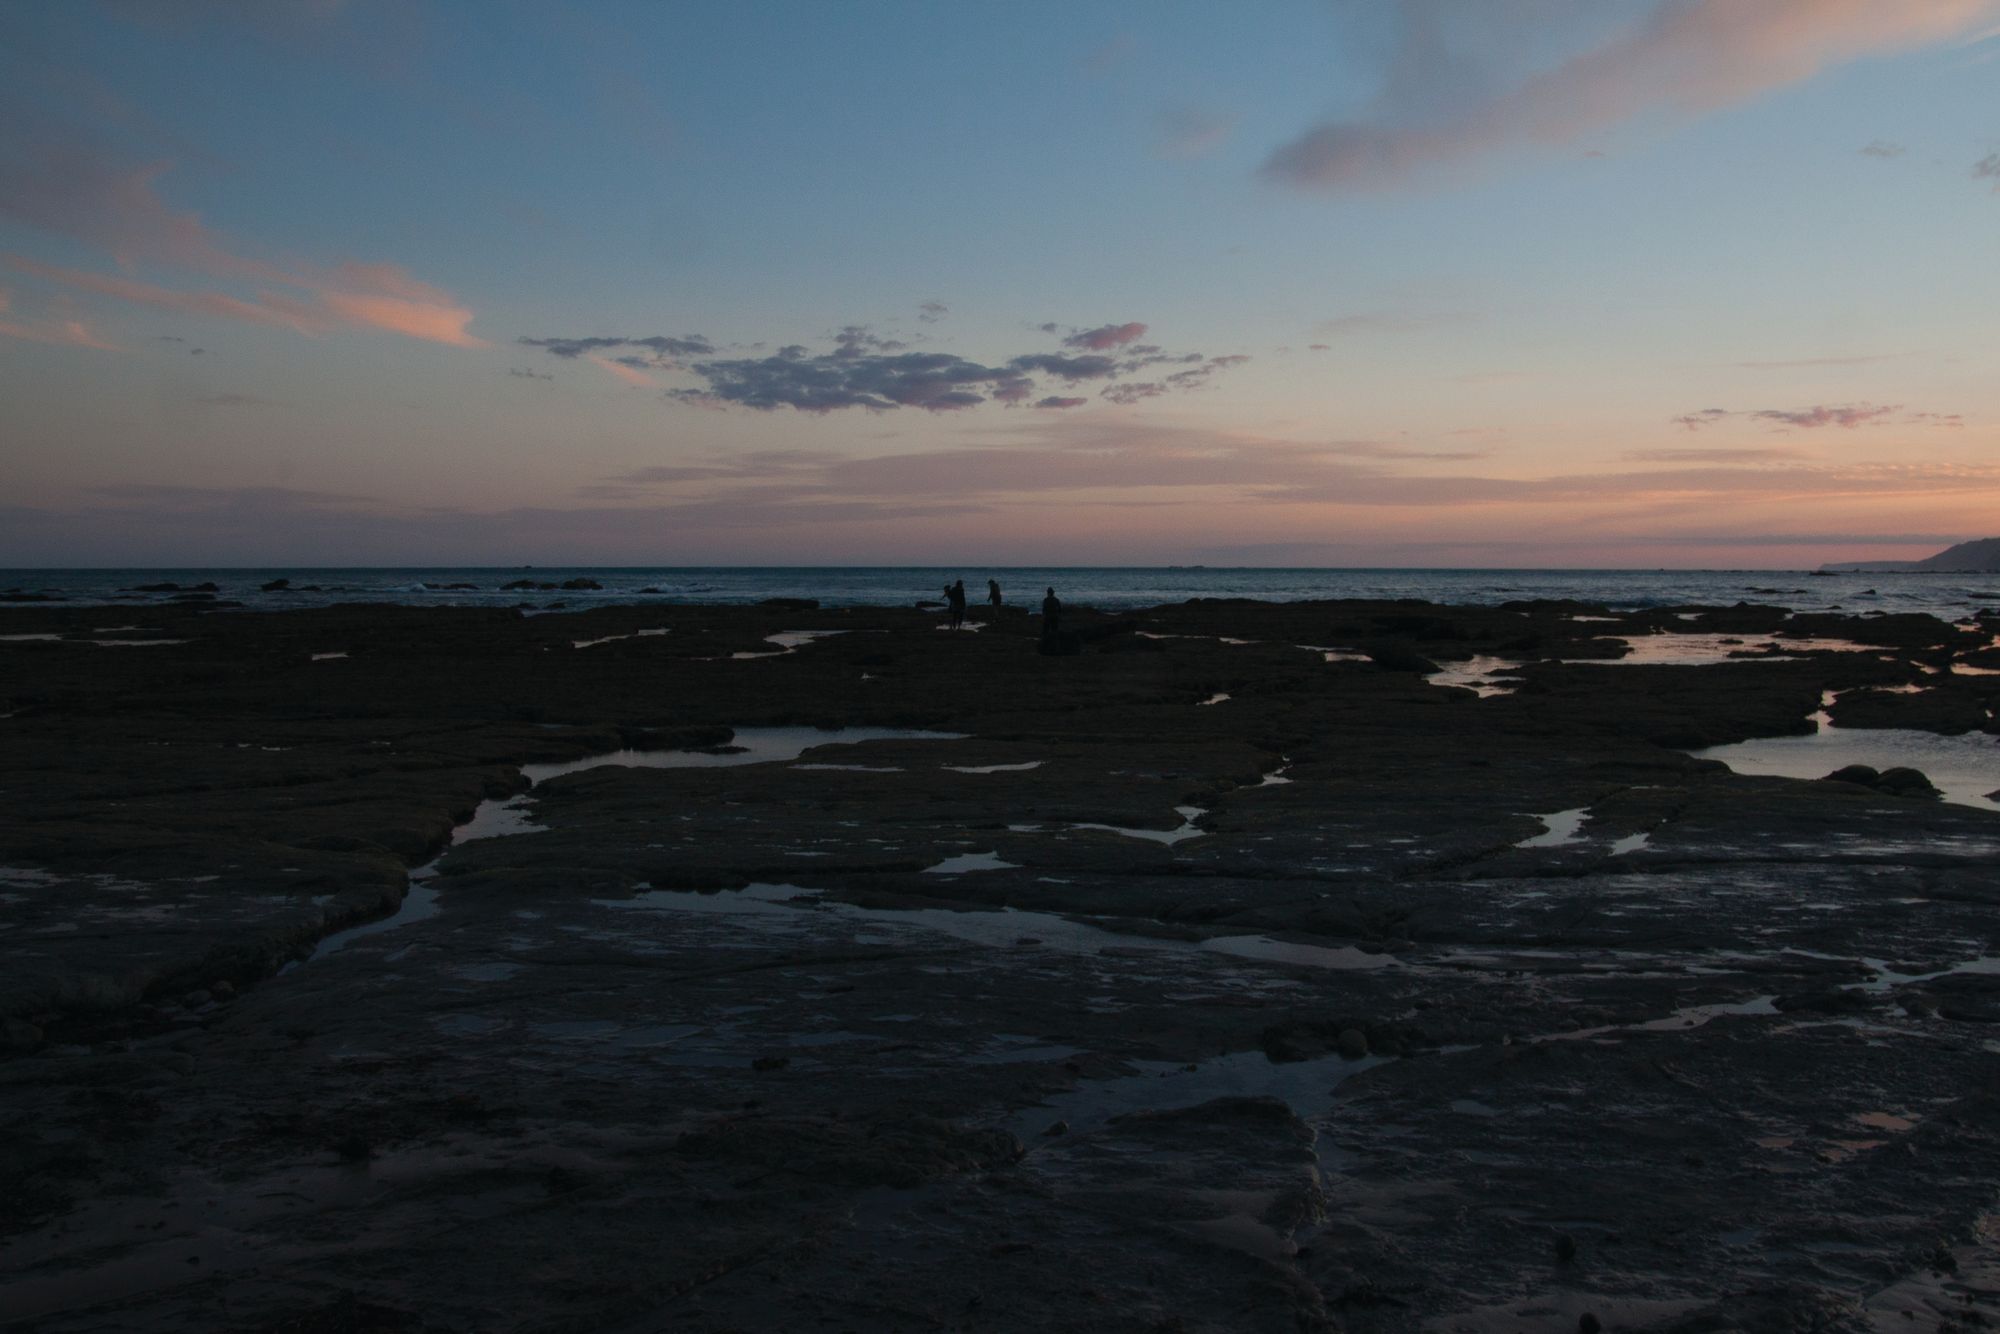 At dusk, coastal flats in the foreground, while in the middle distance, people at the sea edge in the middle distance look for shellfish